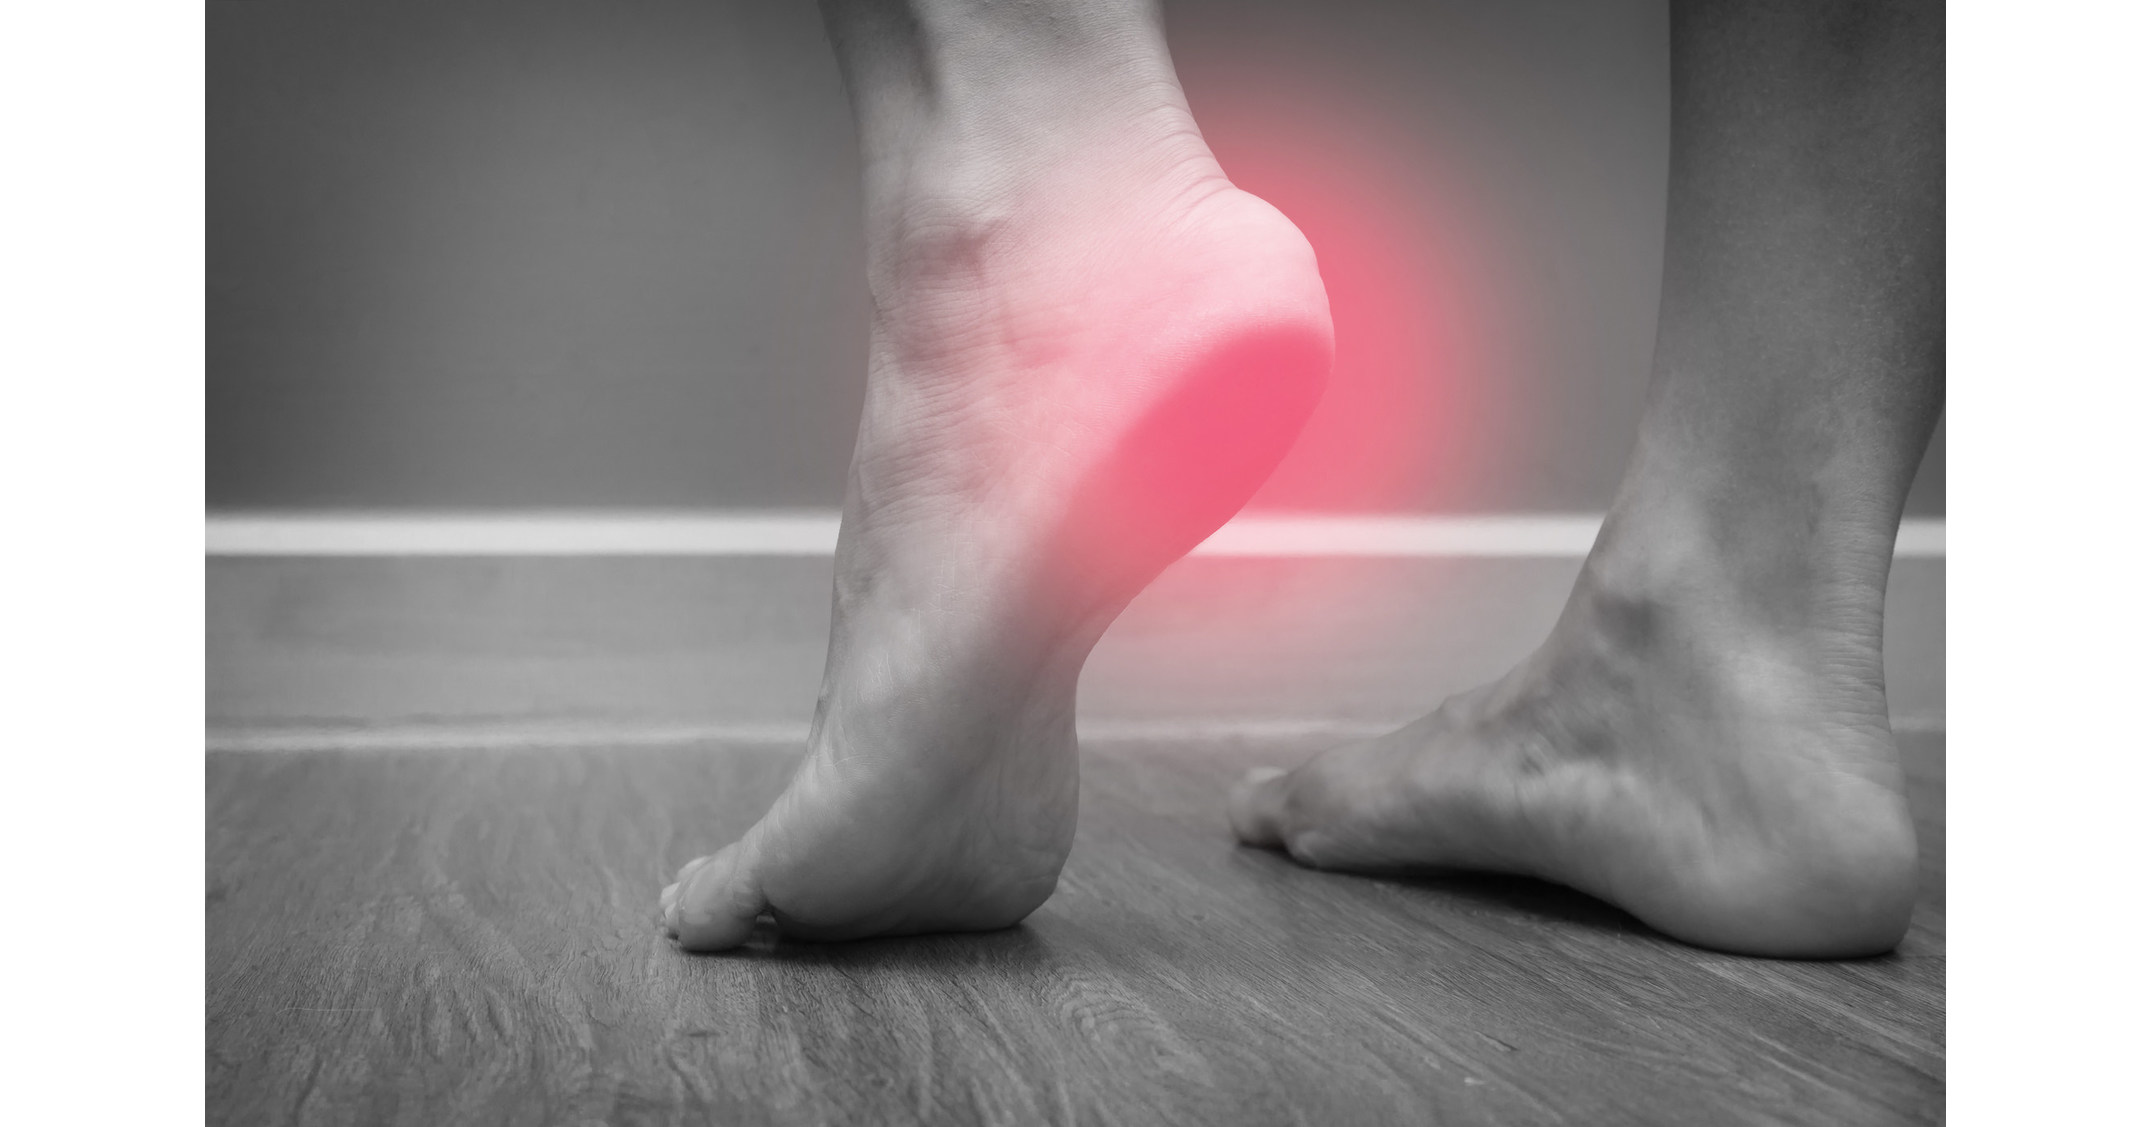 Heel Pain - Six Mistakes Patients Make When Looking For Relief